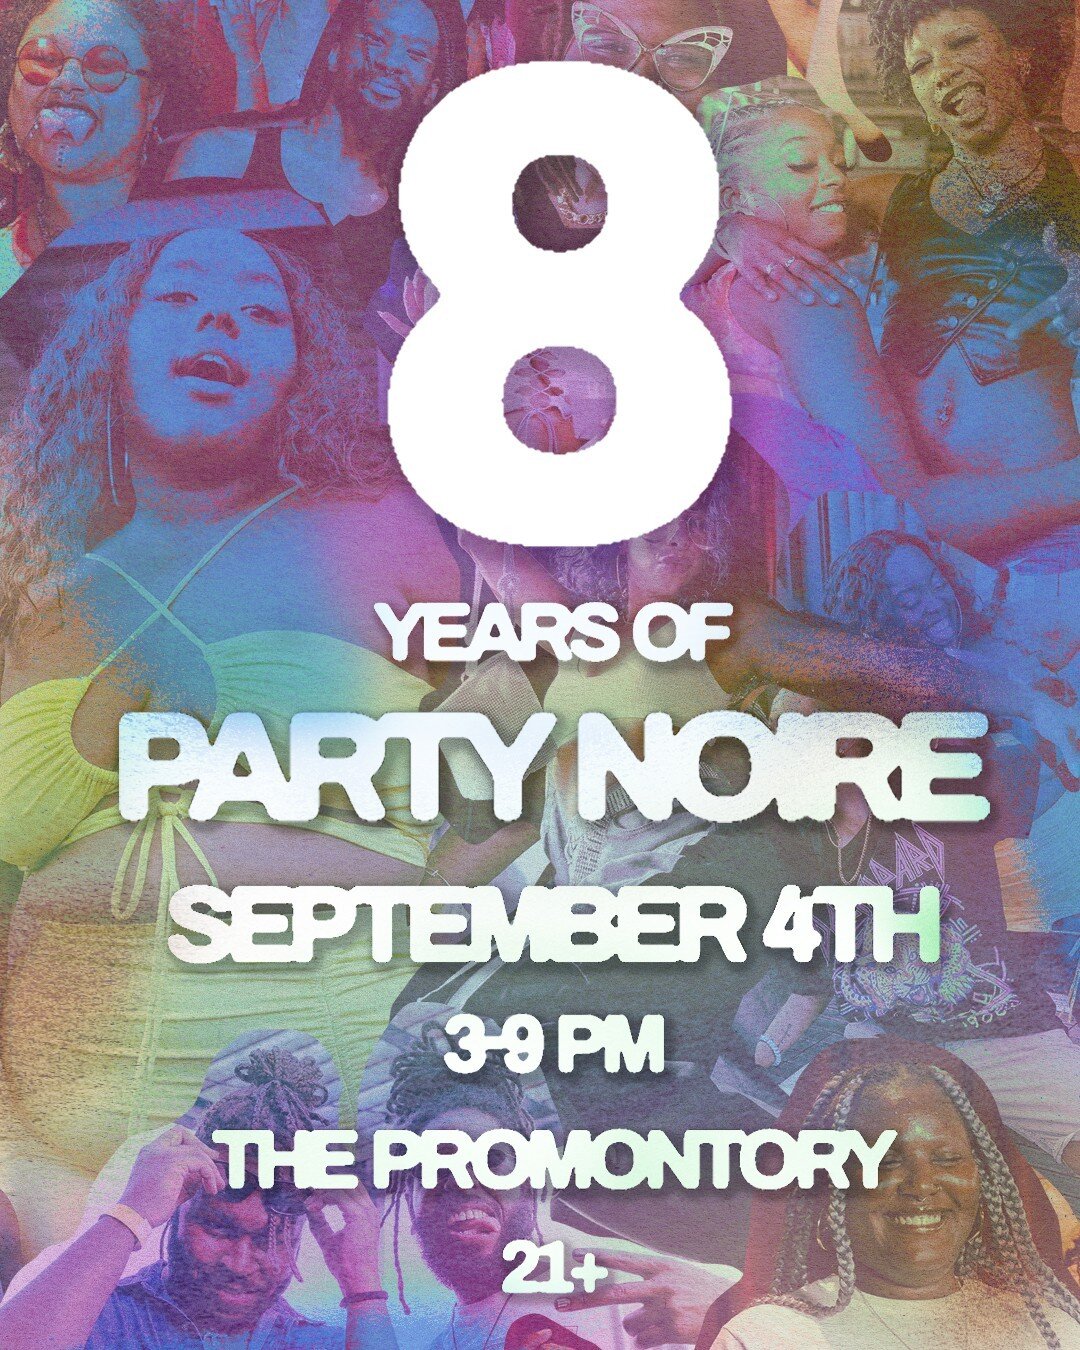 &infin; we can't believe it's been EIGHT years! Save the date for another amazing celebration! 

🎨 @adobewankenobii - 📸 @lyricnewbern
.
.
.
.
#PartyNoire #BlackJoy #chicagoqueers #PartyNoireChicago #blackqueer #POC #QPOC #LGBTQ #chicago #queernight